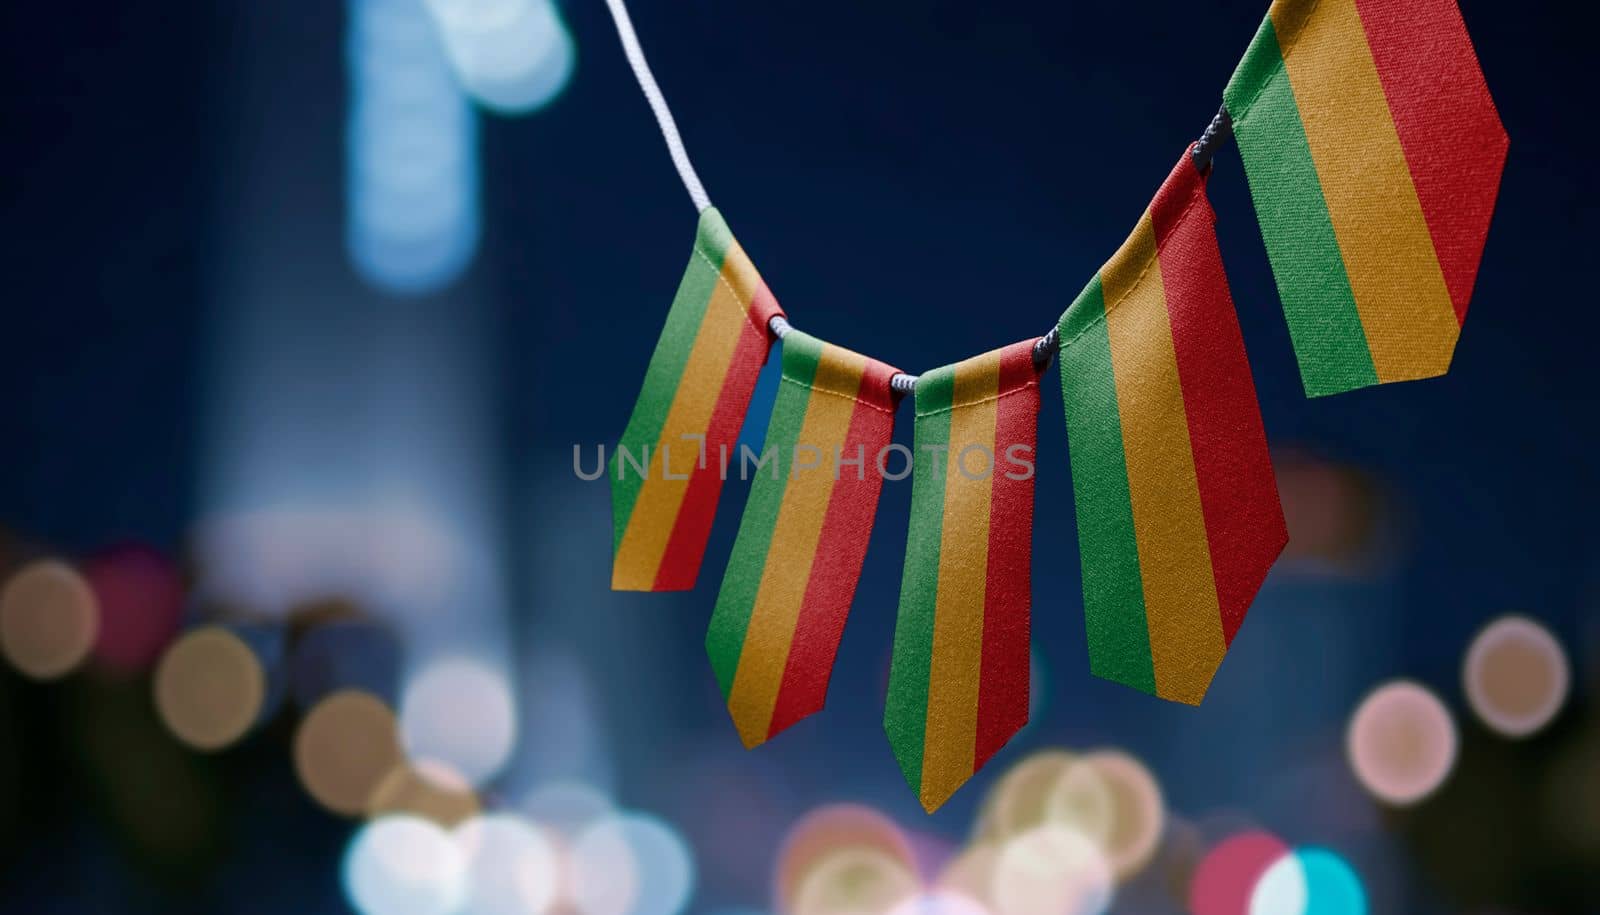 A garland of Bolivia national flags on an abstract blurred background by butenkow